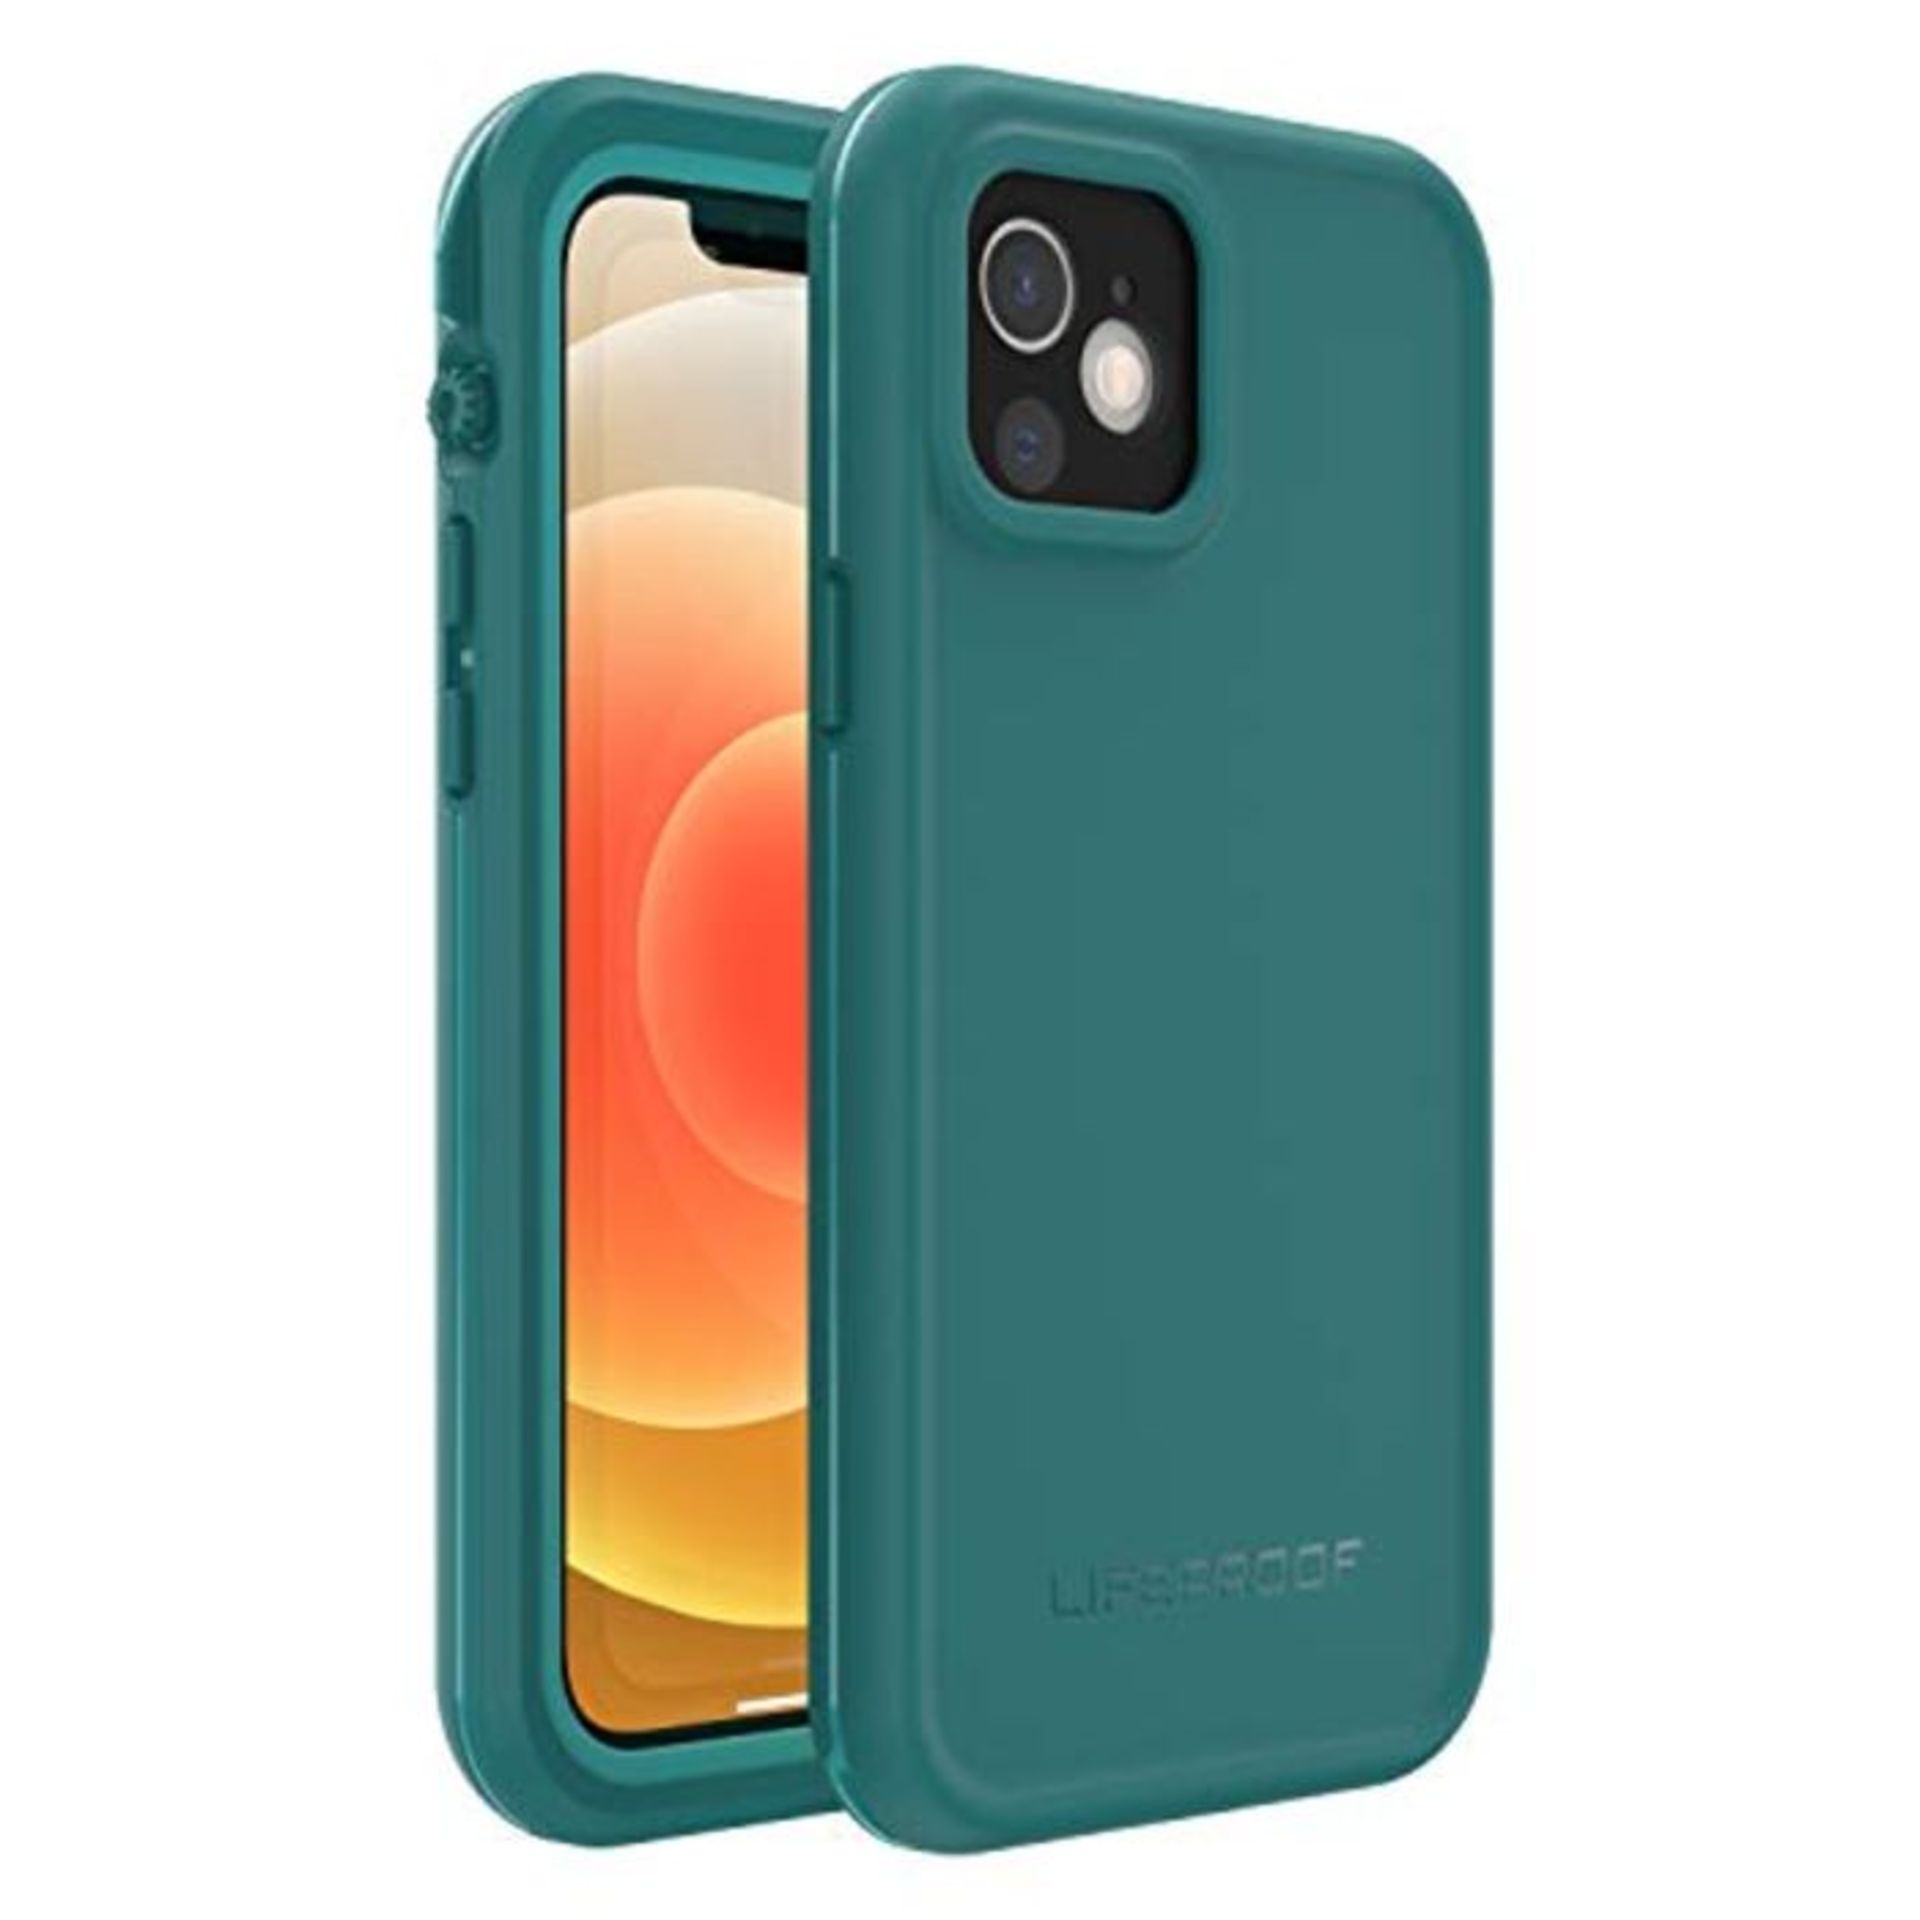 RRP £60.00 LifeProof for iPhone 12, Waterproof Drop Protective Case, Fre Series, Blue